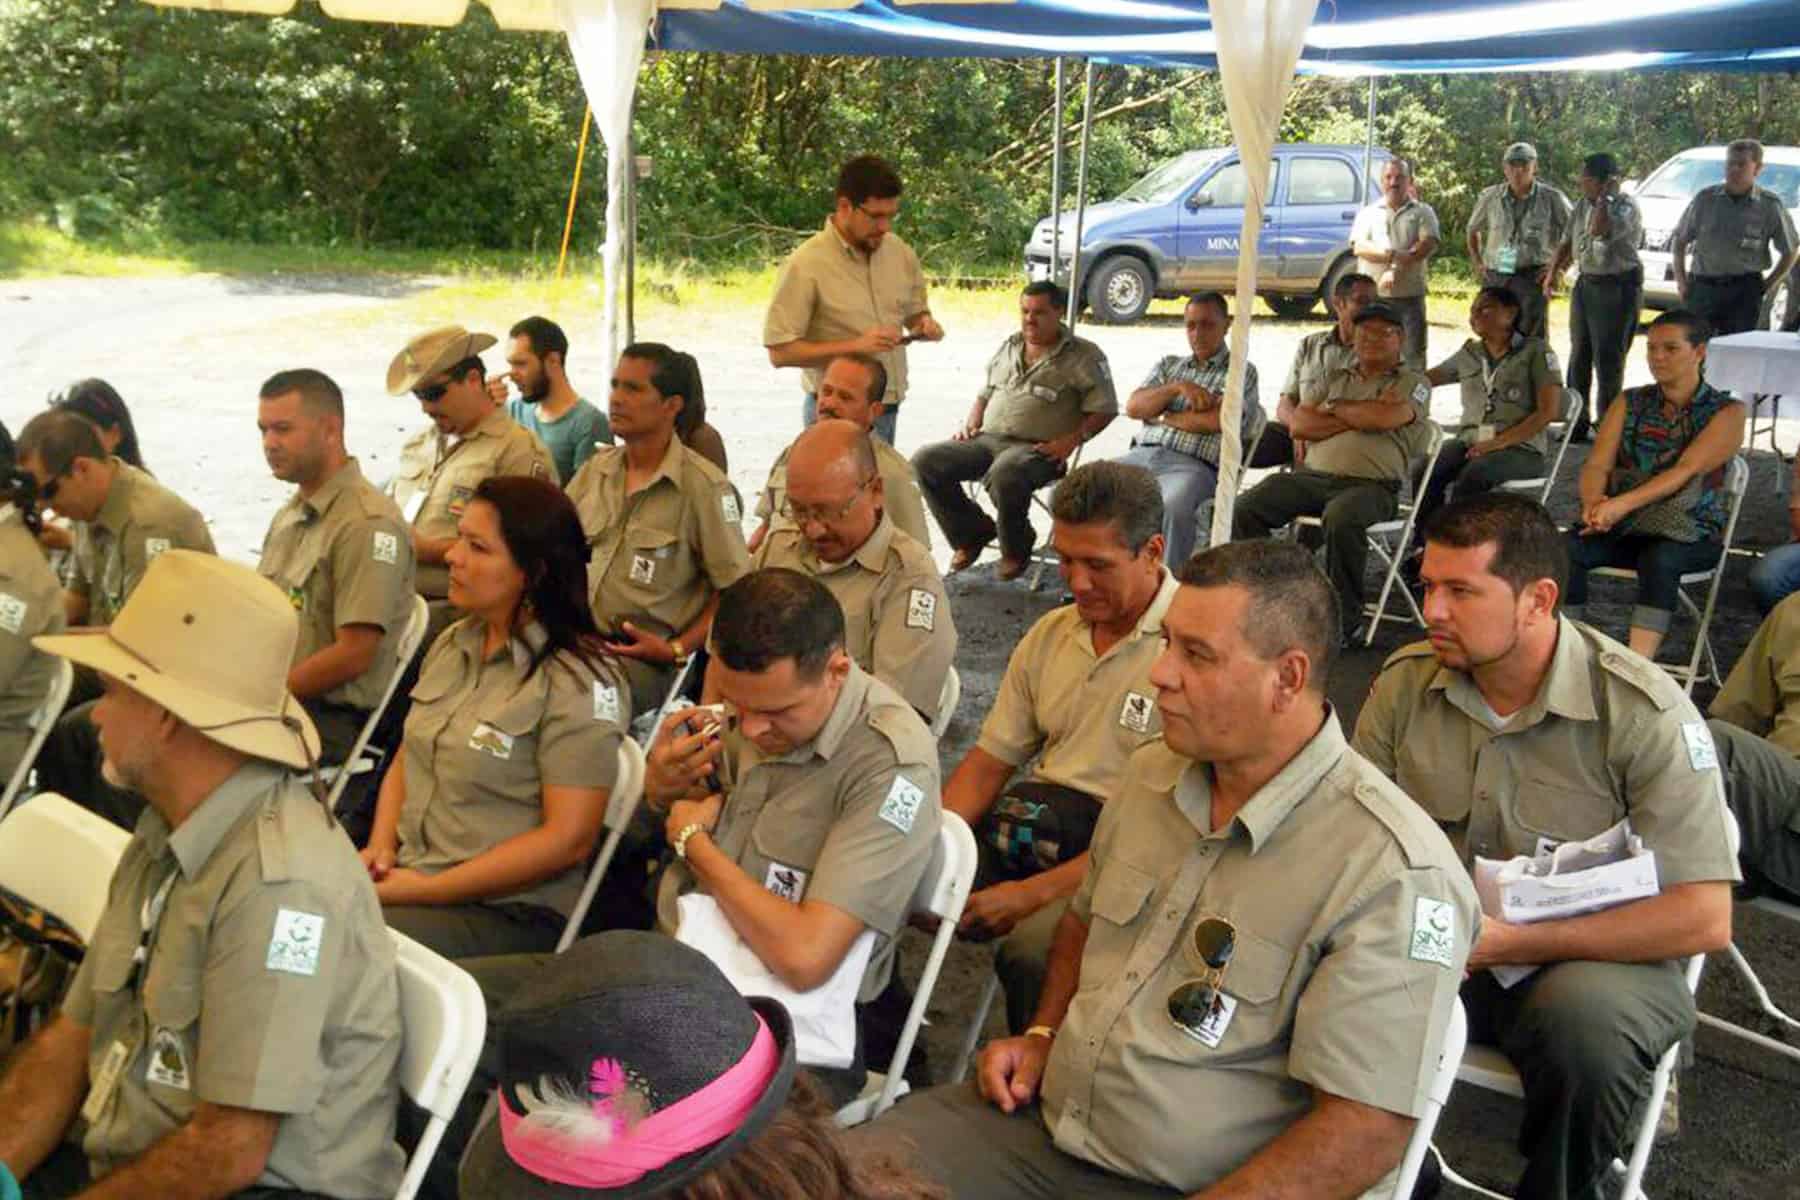 Park rangers at National Park's Day, Aug. 25 2015